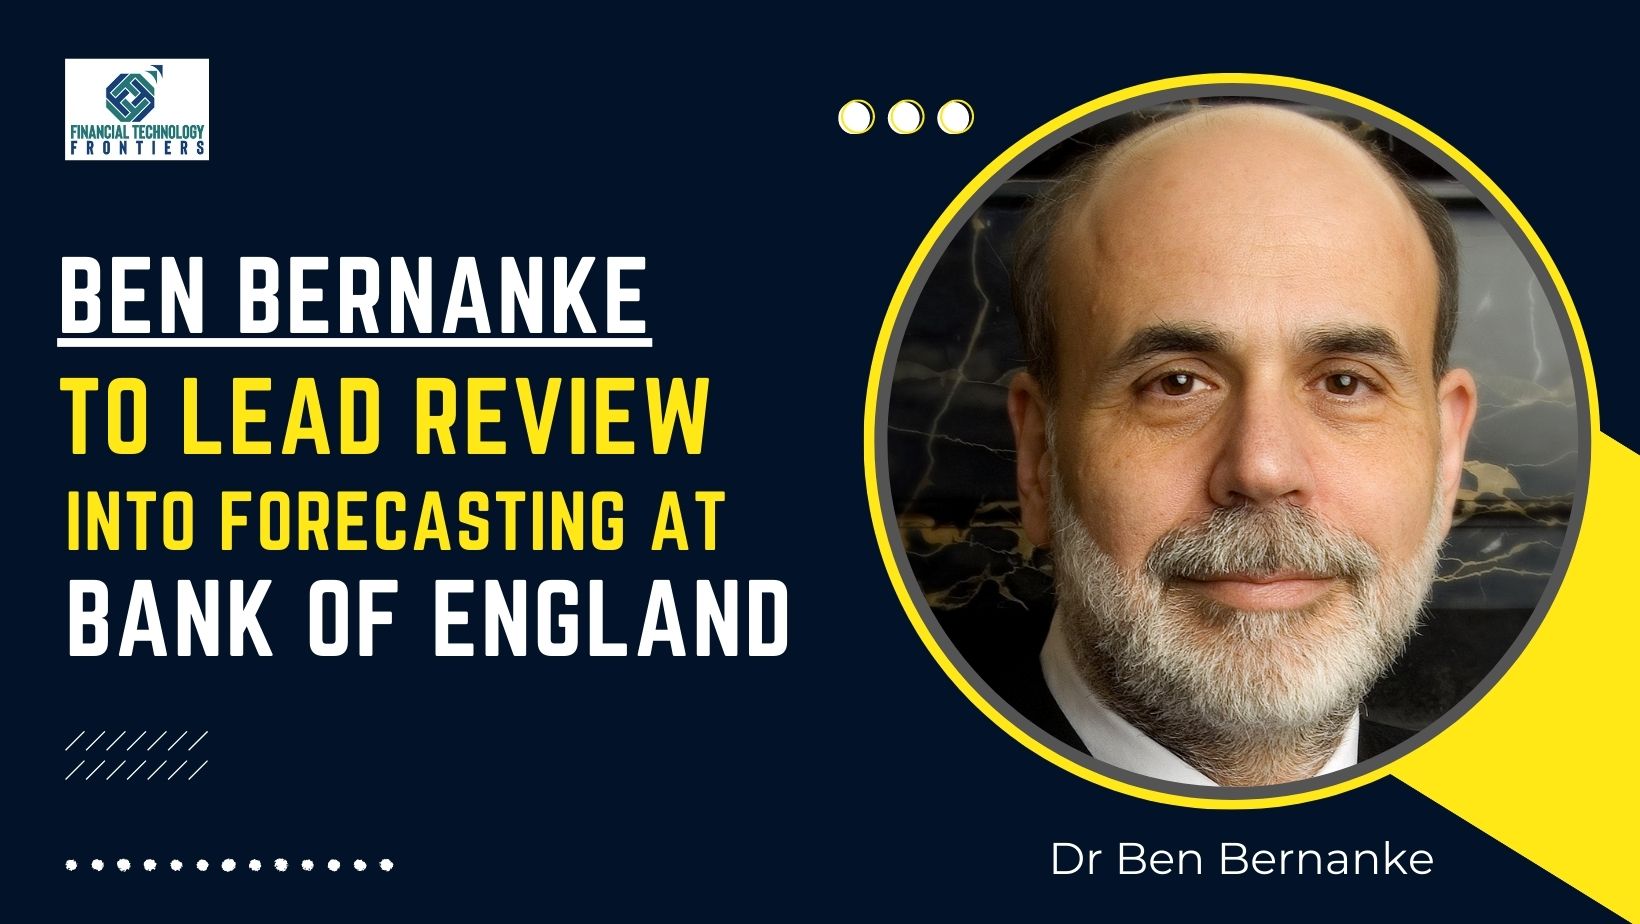 Ben Bernanke to lead review into forecasting at Bank of England  